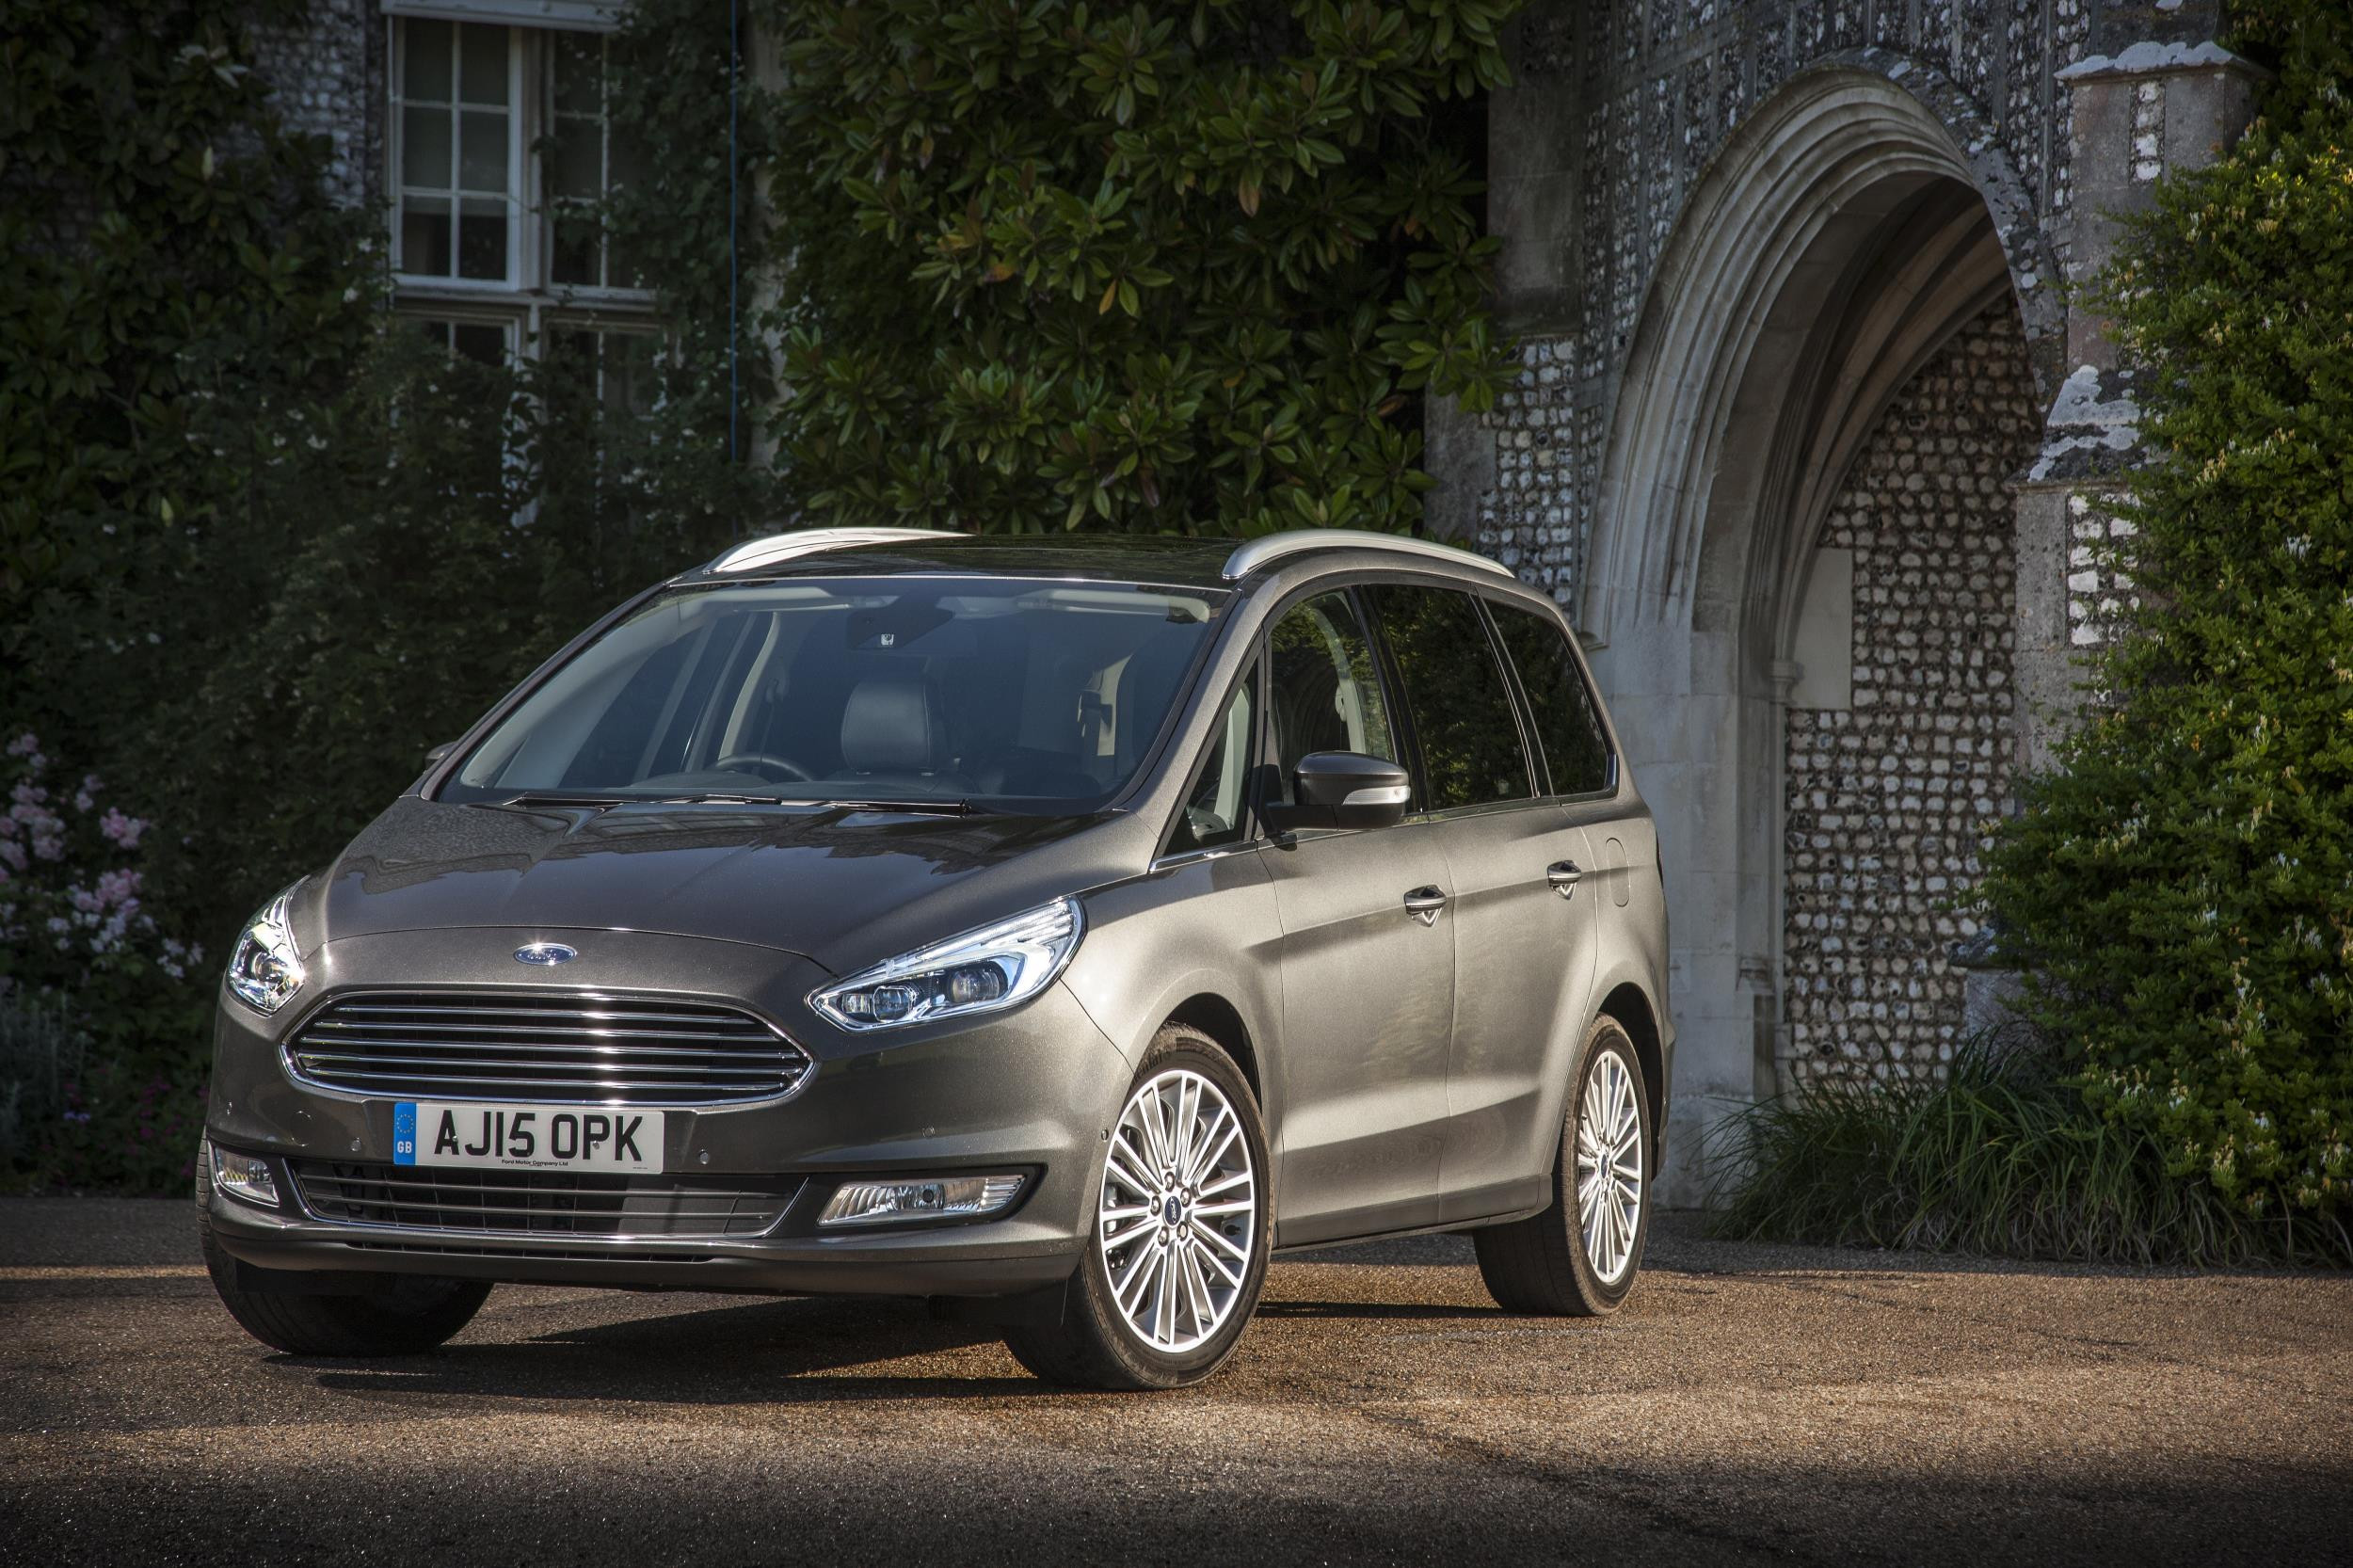 Grey Ford Galaxy parked three-quarters facing left in front of country house.